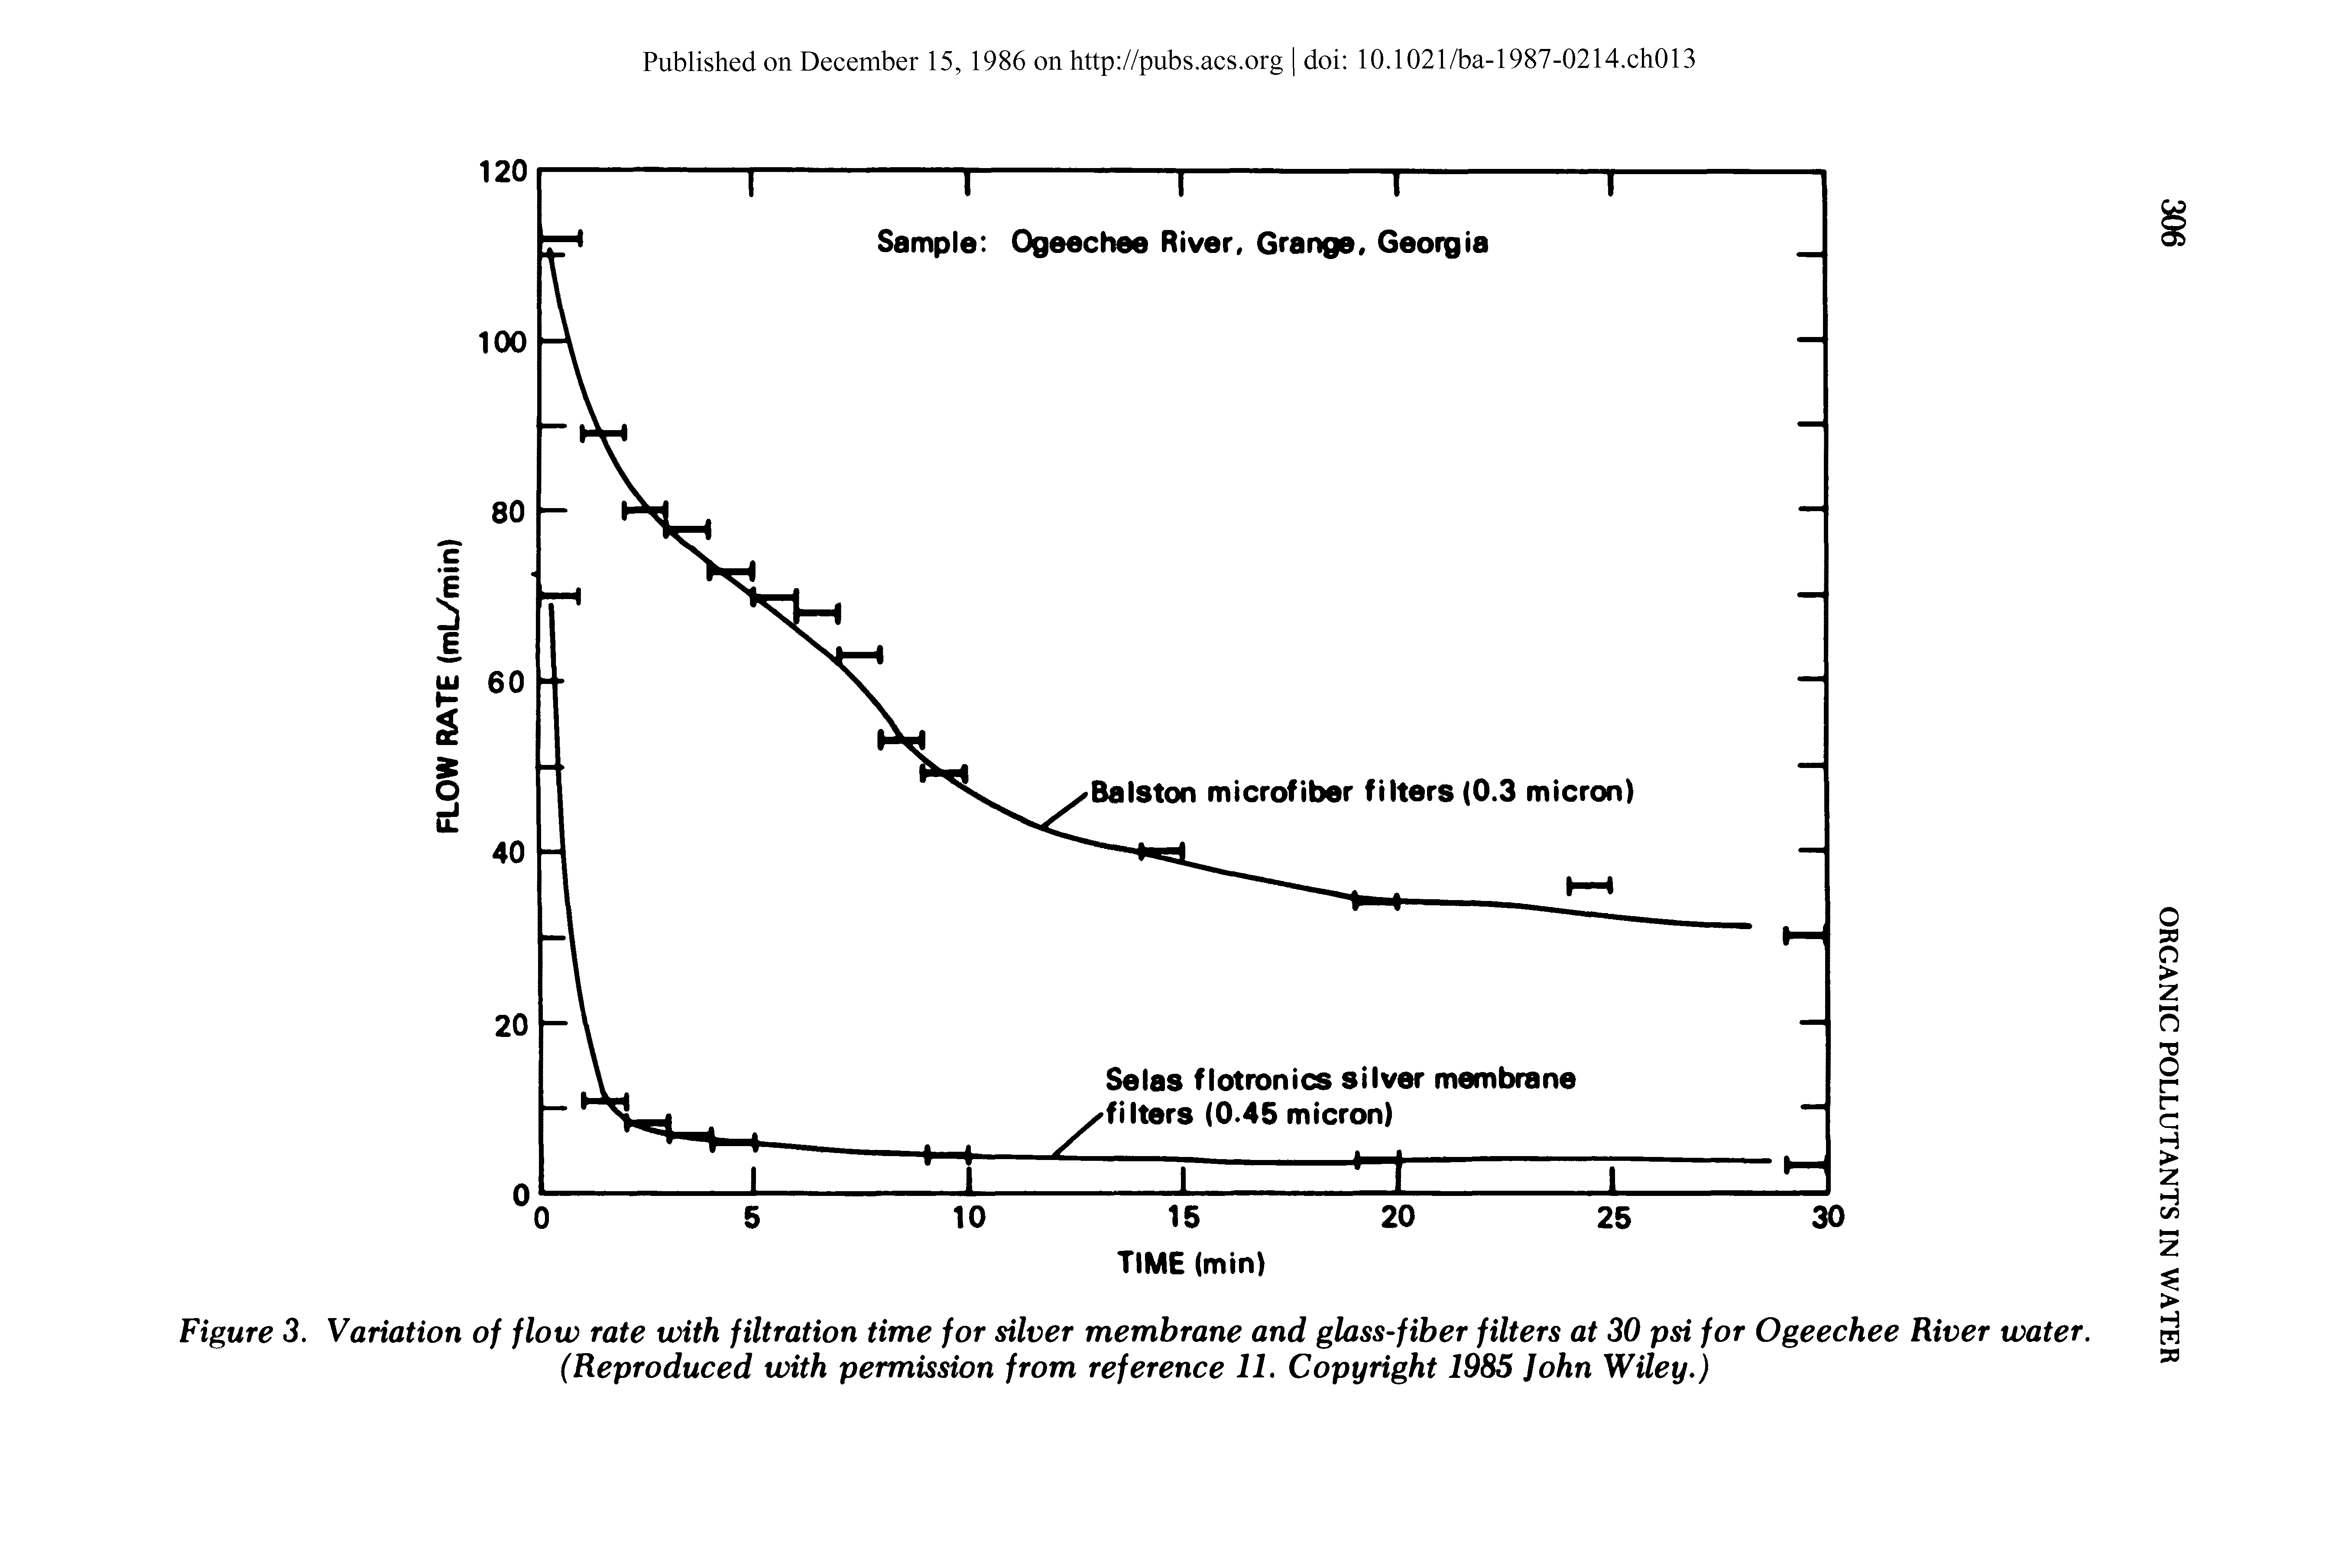 Figure 3. Variation of flow rate with filtration time for silver membrane and glass-fiber filters at 30 psi for Ogeechee River water. (Reproduced with permission from reference 11. Copyright 1985 John Wiley.)...